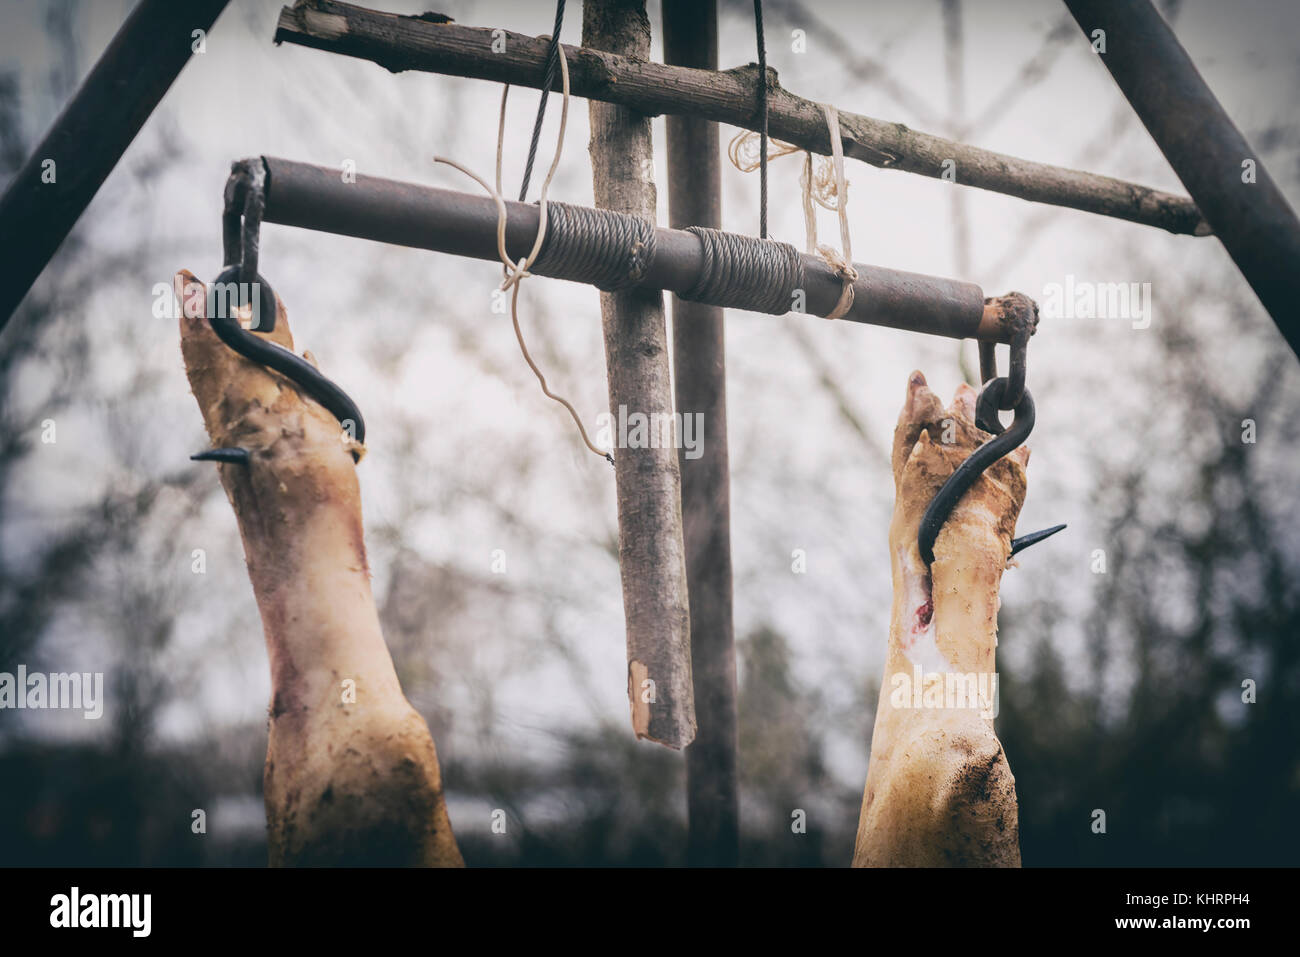 The slaughtered pig is hangs on a hook, hanging on a tripod, the process of freshening, Western Ukraine Stock Photo